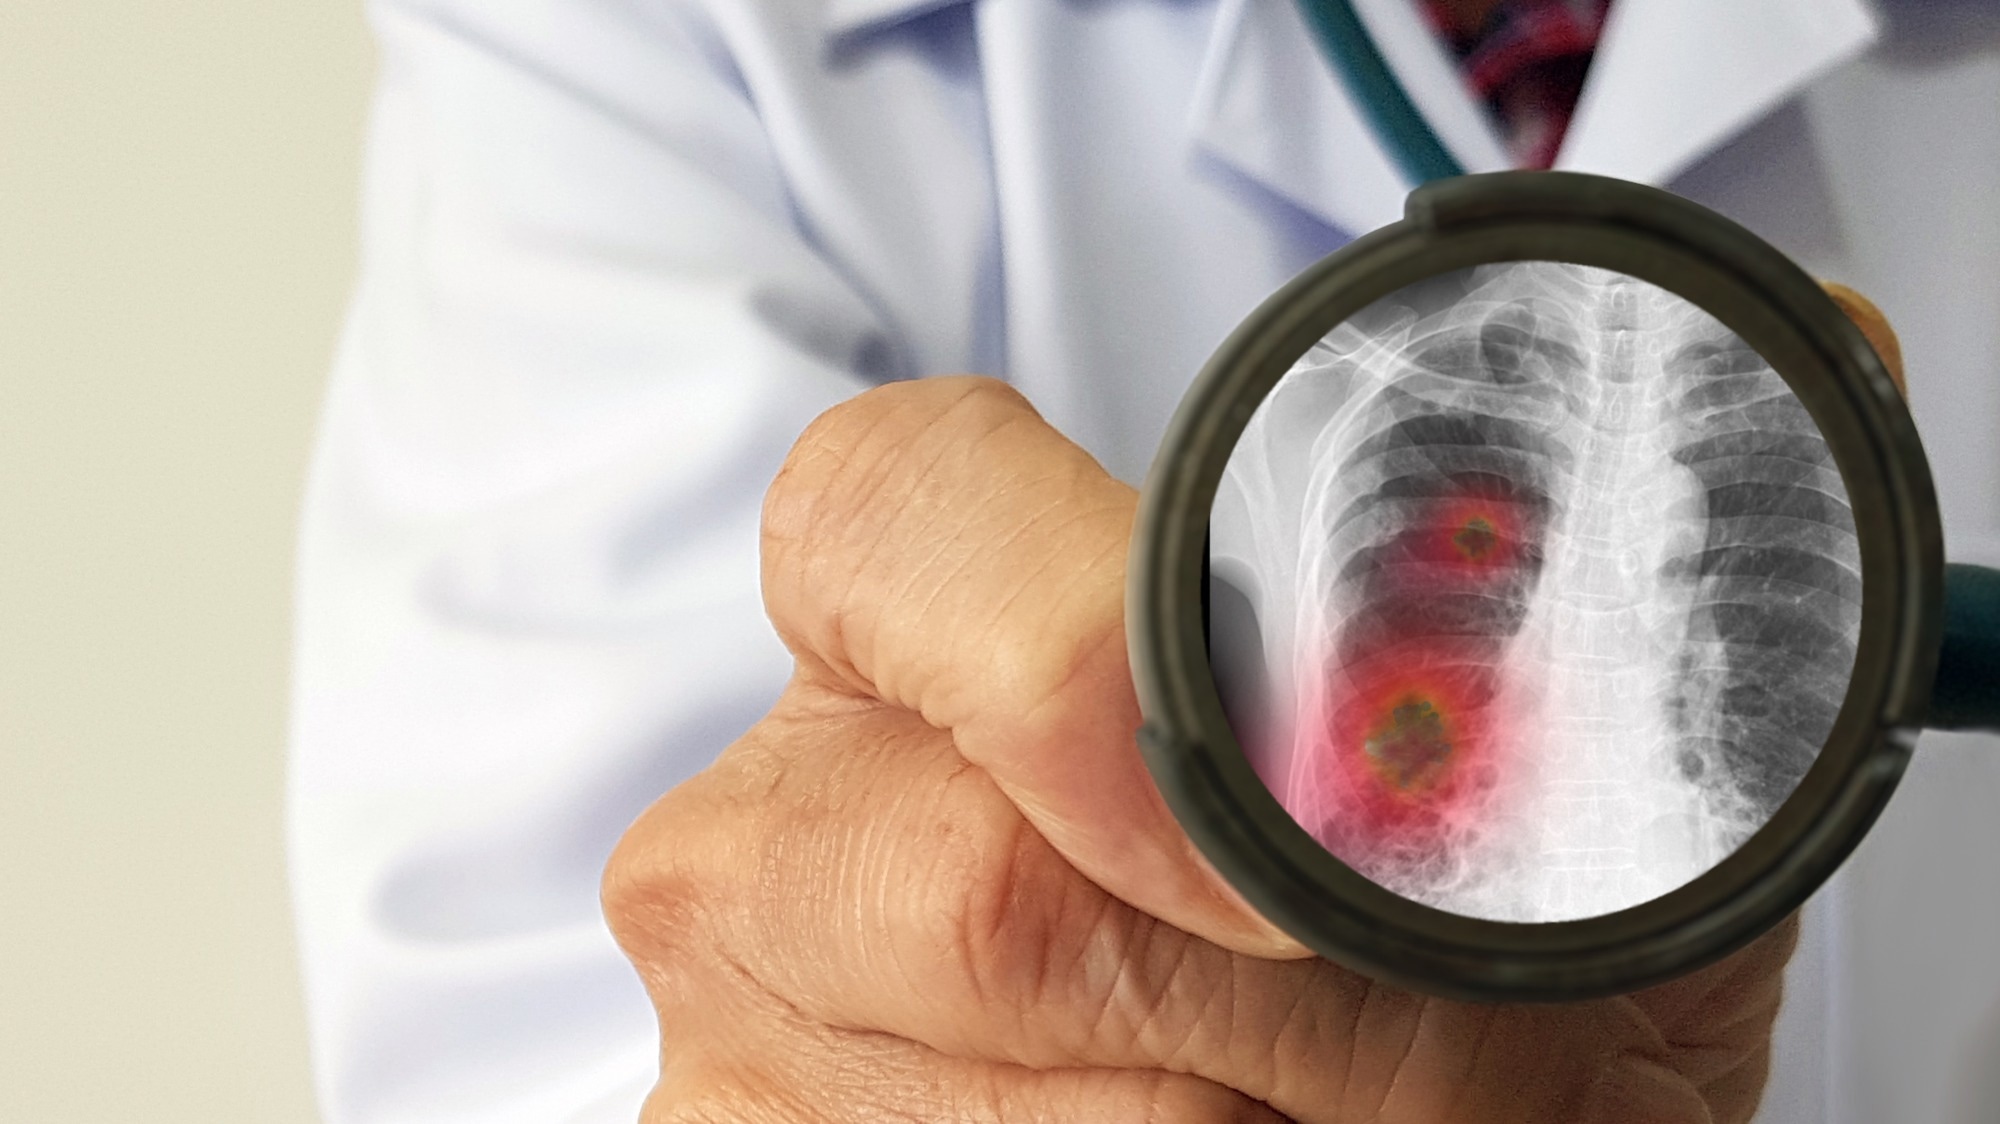 Study: Pneumococcal serotypes and risk factors in adult community-acquired pneumonia 2018–20; a multicentre UK cohort study. Image Credit: joel bubble ben/Shutterstock.com